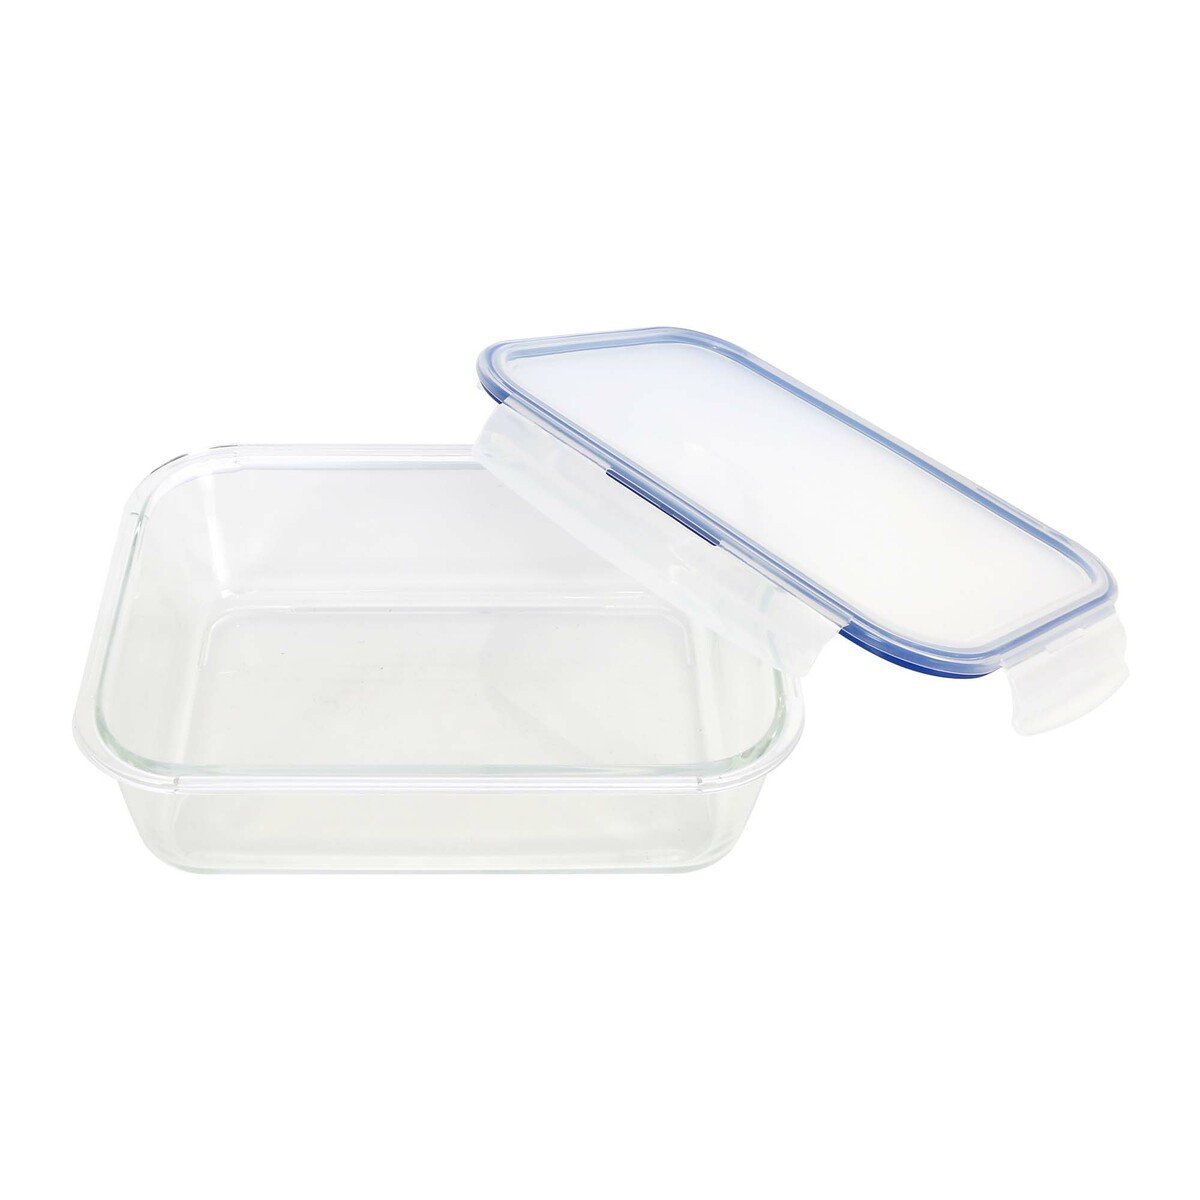 Chefline Rectangular Glass Container 197CL